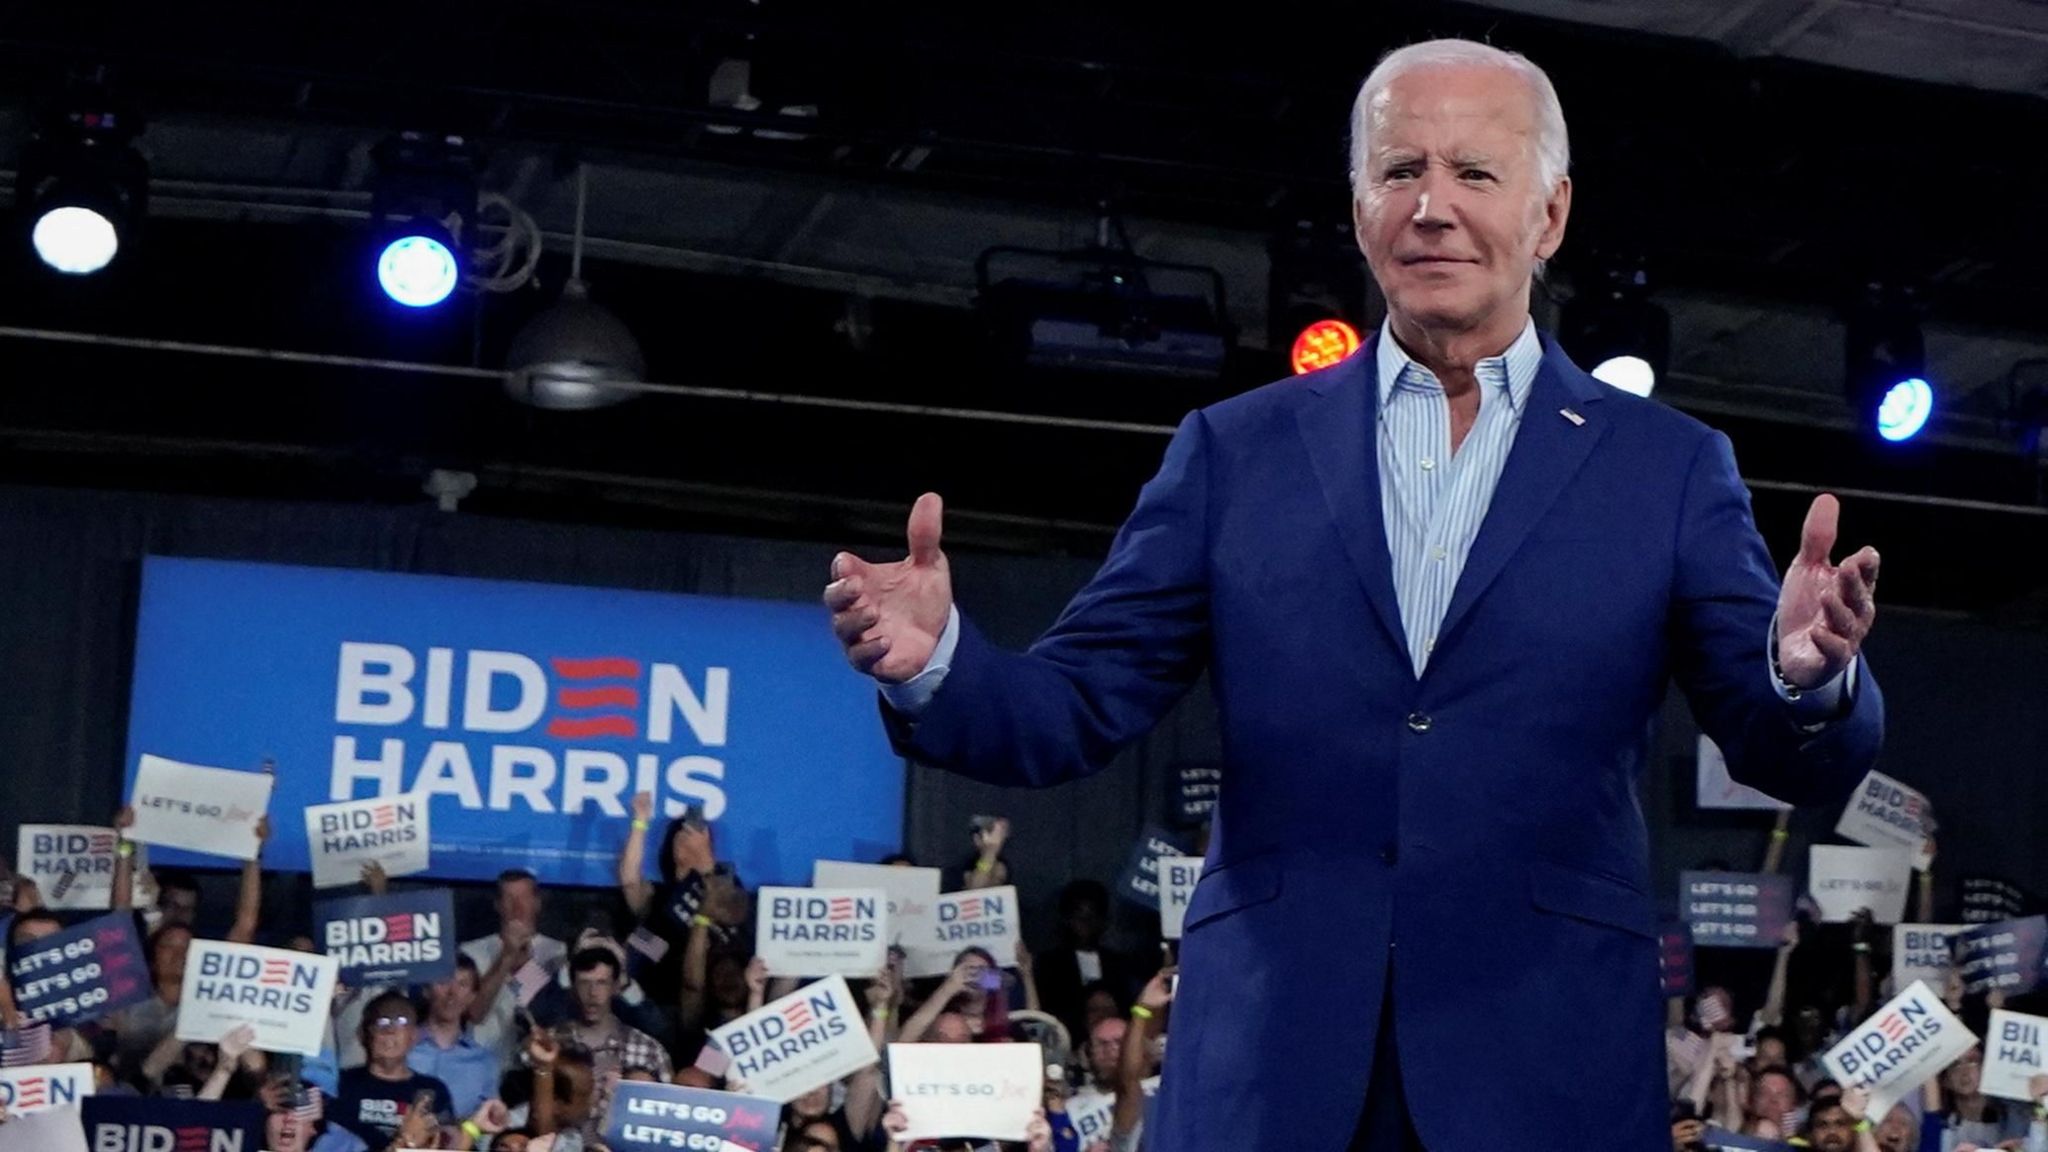 Biden in a blue blazer with hands out, in front of a crowd and large Biden Harris sign